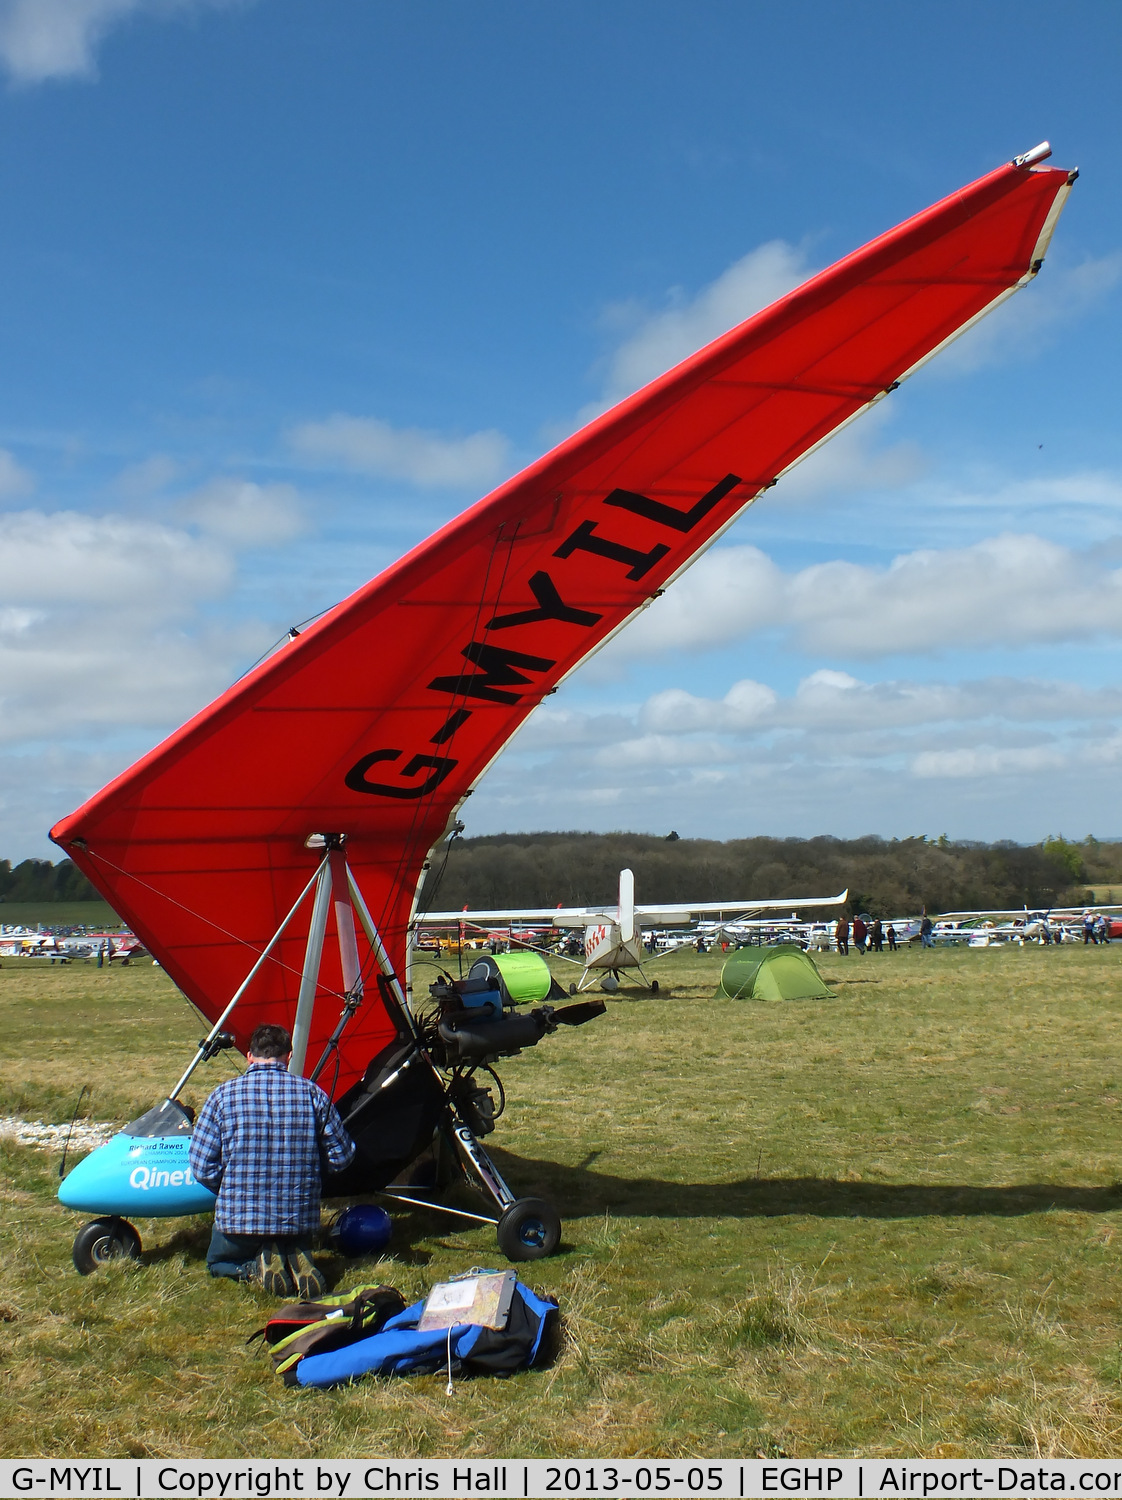 G-MYIL, 1993 Cyclone Airsports Chaser S 508 C/N CH849, at the LAA Microlight Trade Fair, Popham